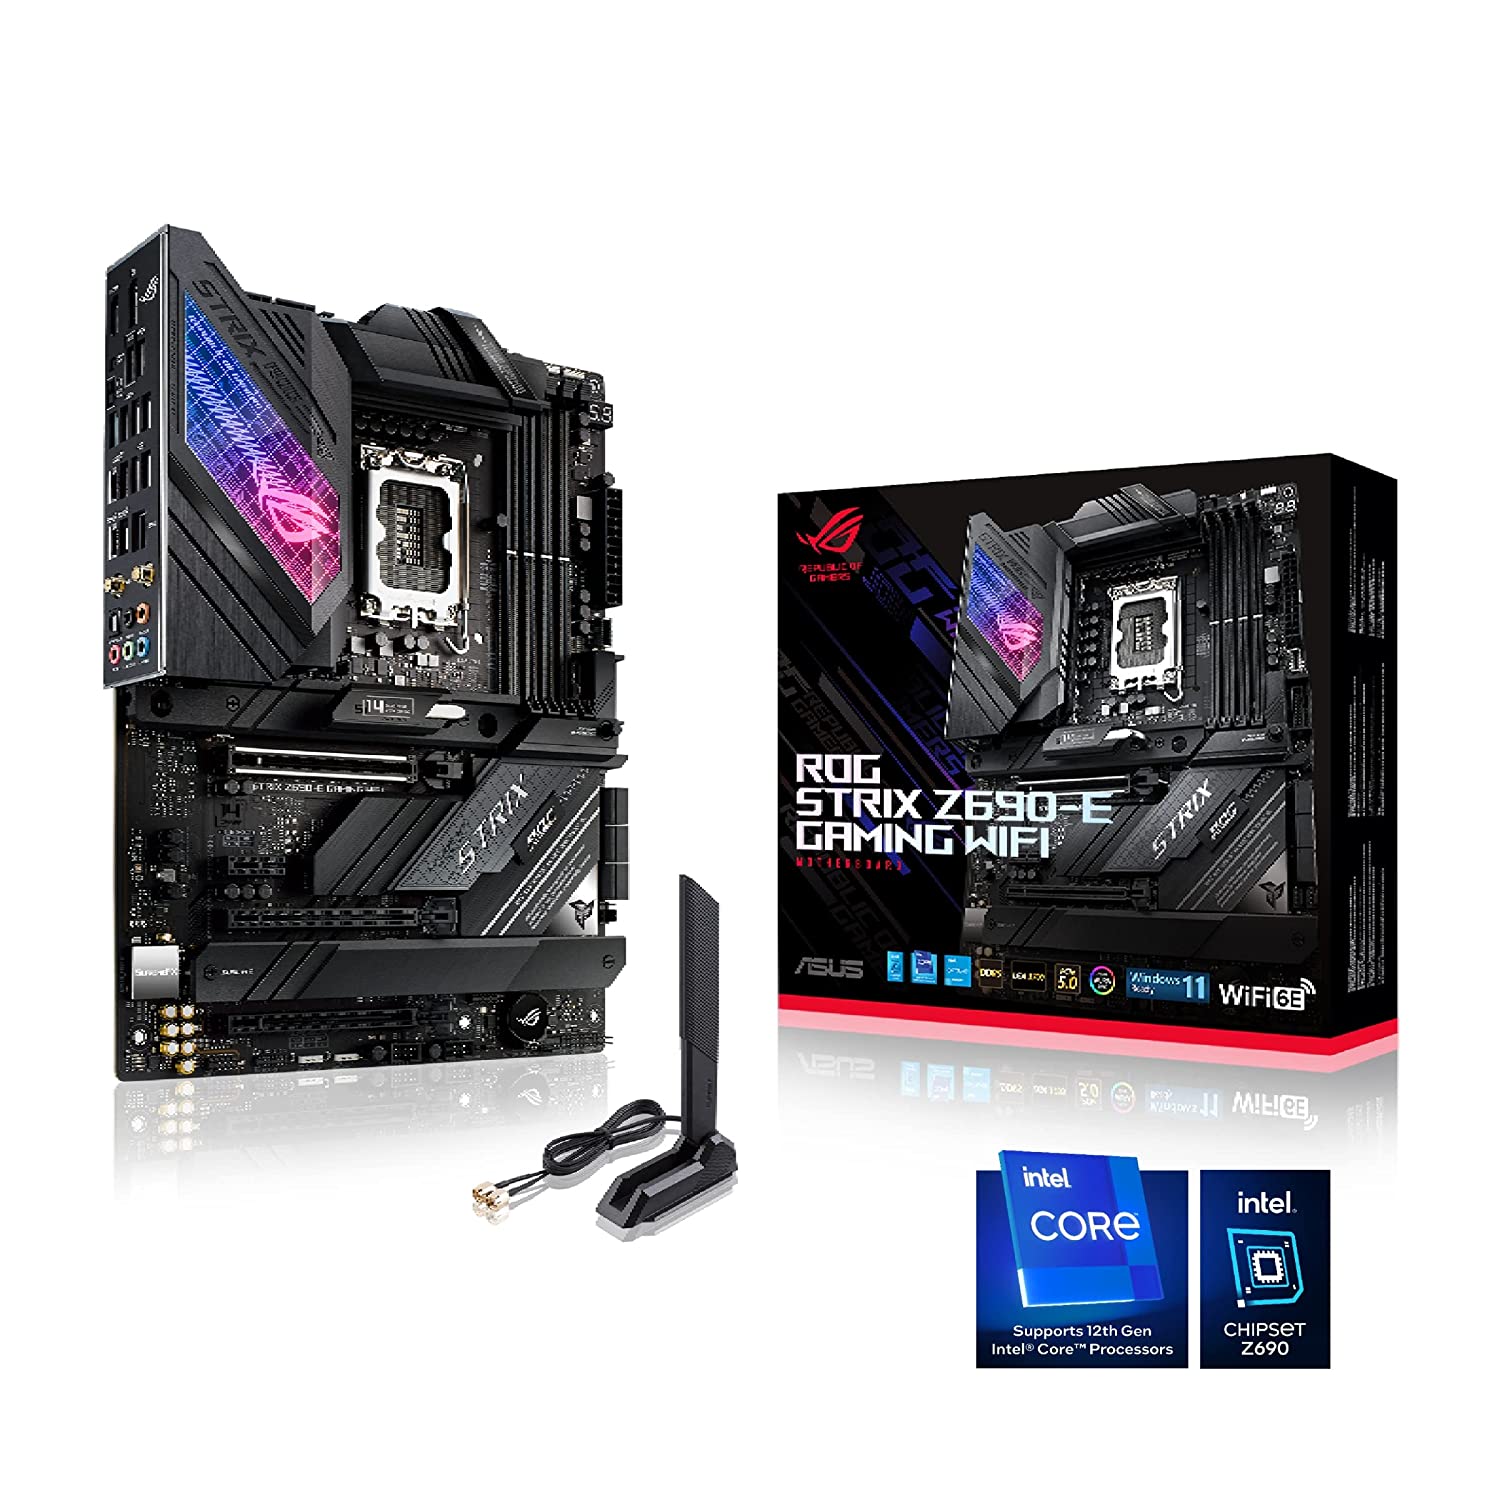 Asus ROG Strix Z690-E Gaming WIFI Motherboard support latest 12th Gen Intel CPU's with LGA 1700 socket, Pentium Gold and Celeron Processors.-Motherboard-dealsplant